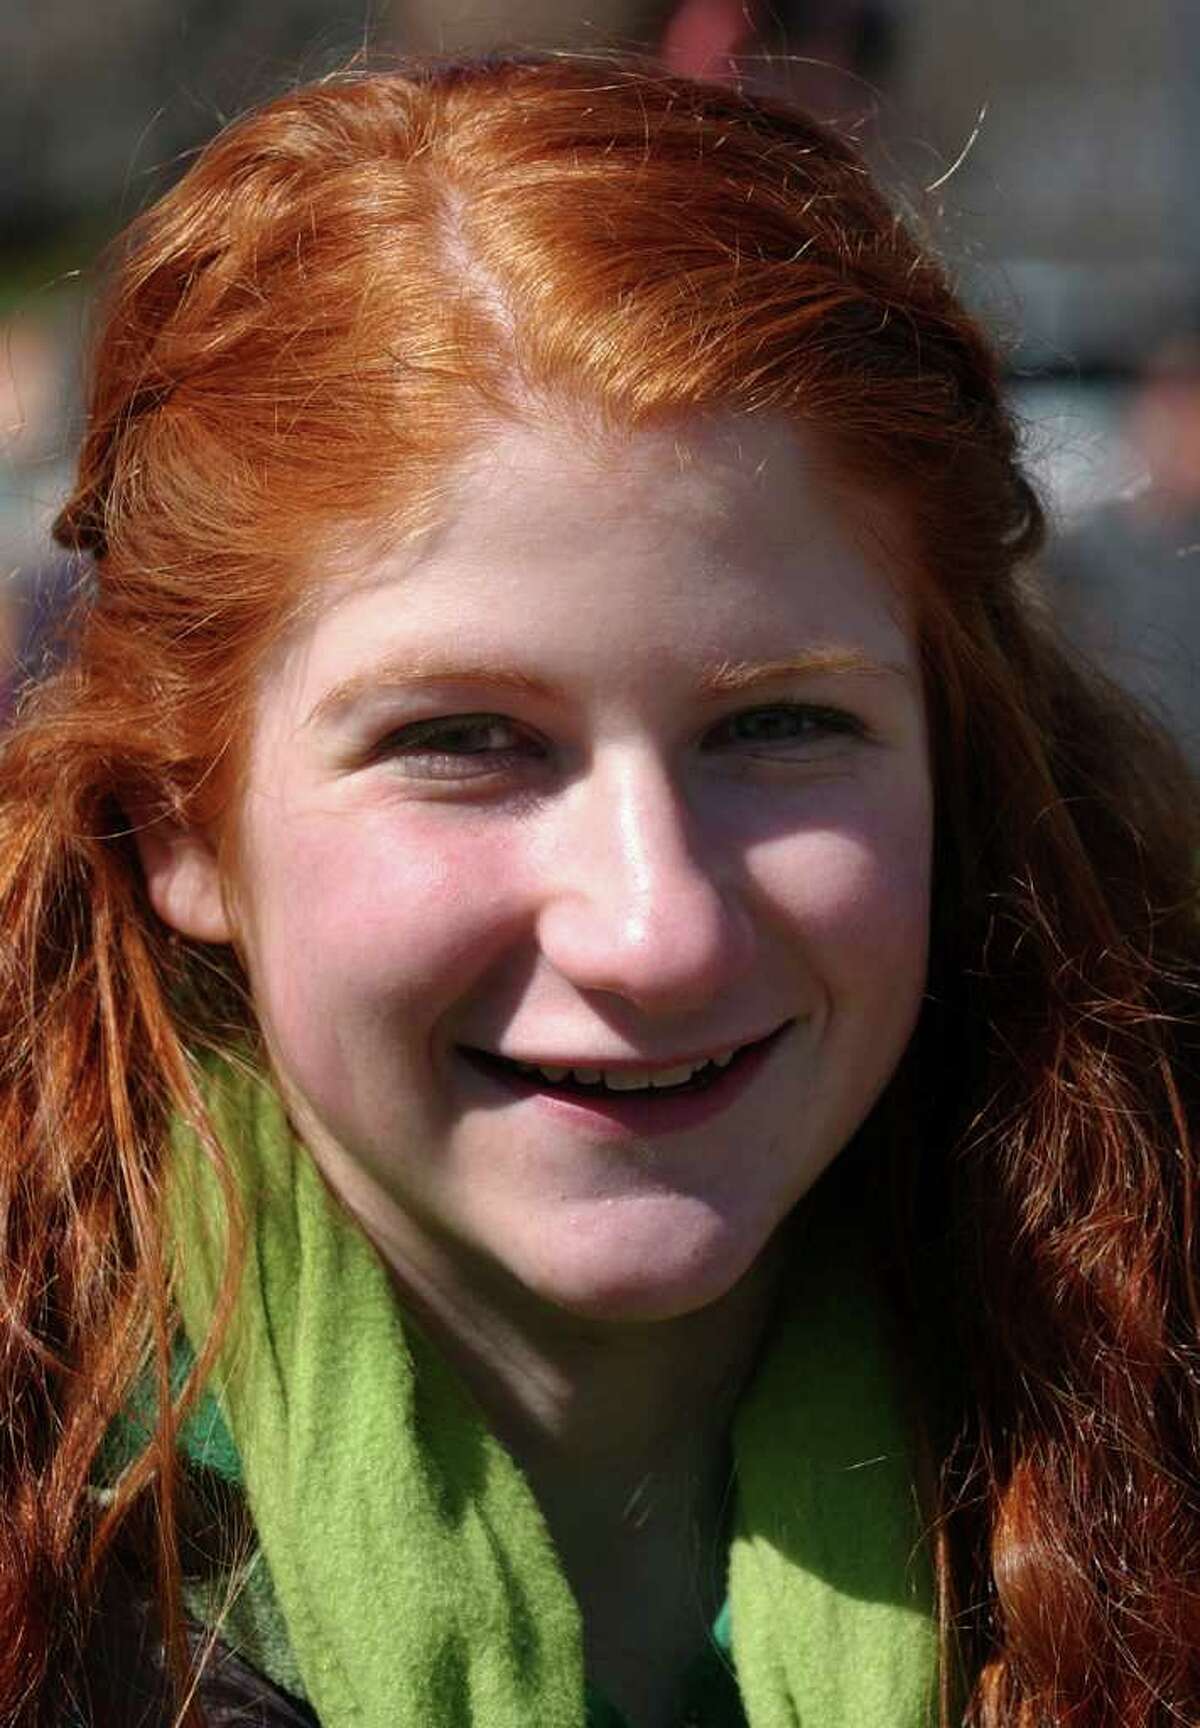 Casey Wilcox, of Milford, attends the St. Patrick's Day Parade in downtown Milford, Conn. on Saturday March 10, 2012.